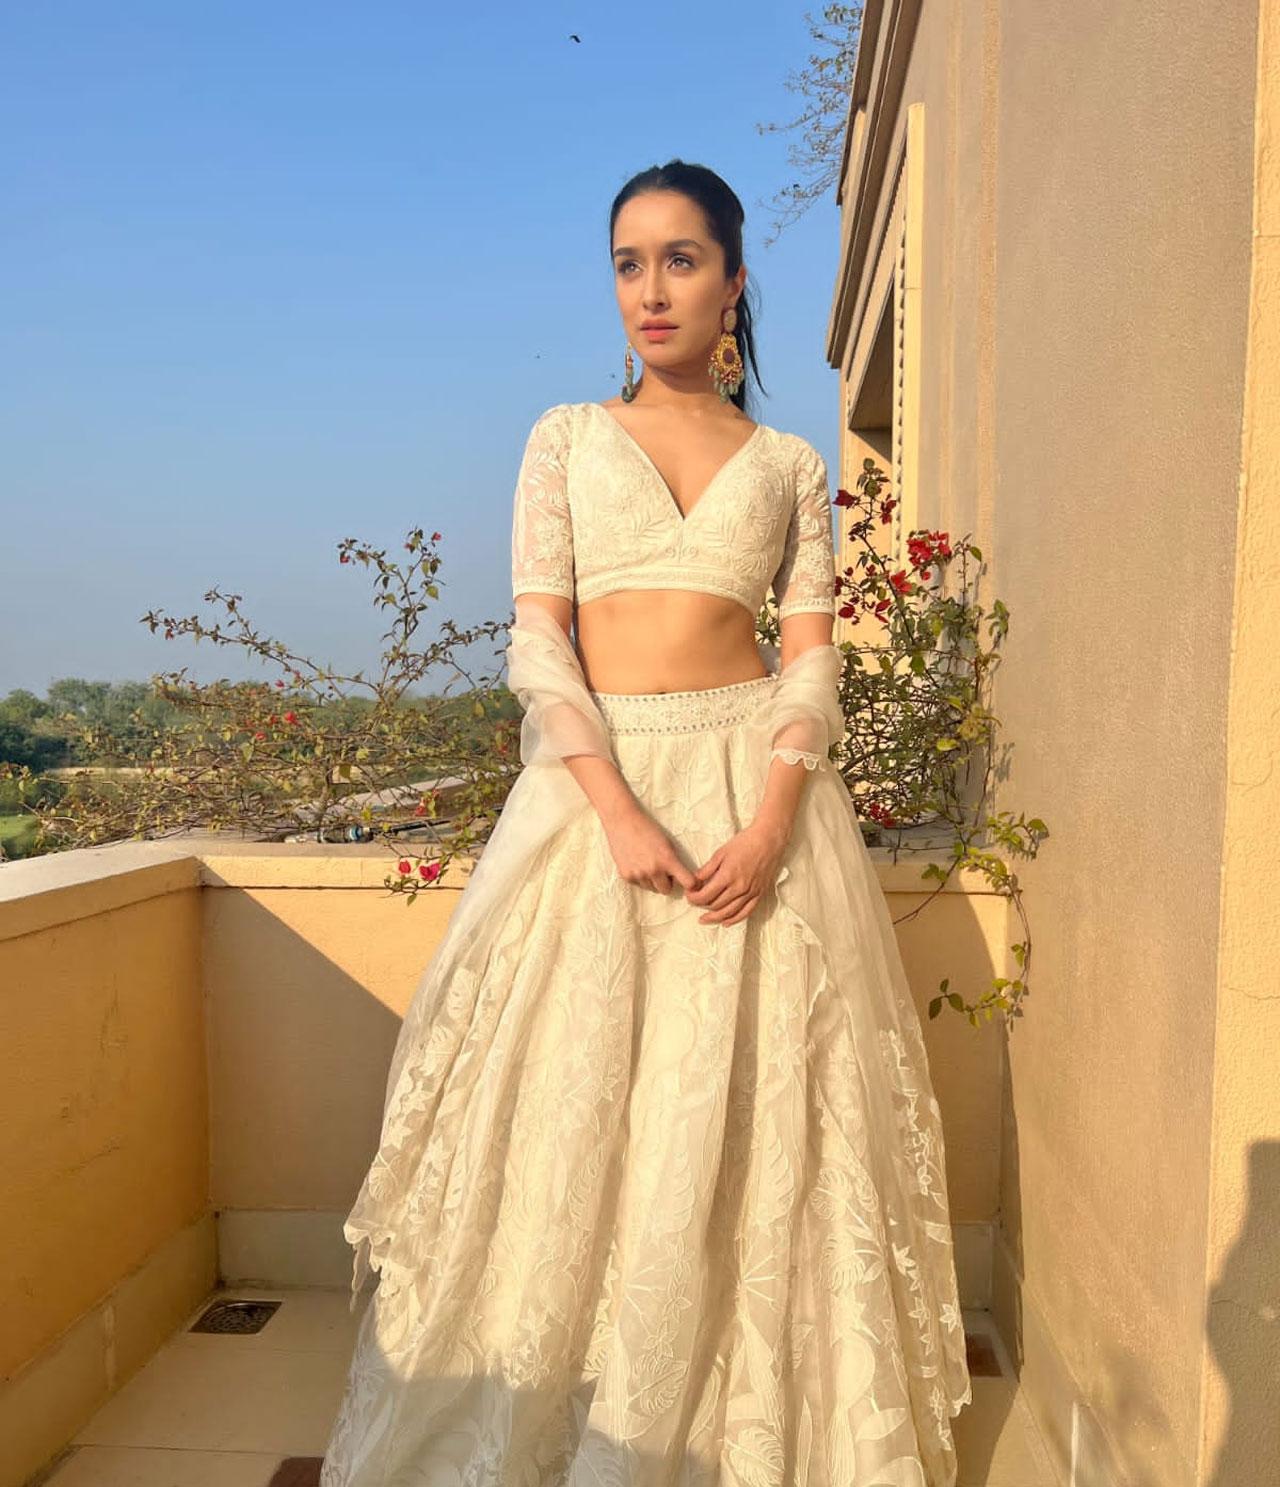 The actress took to her social media today to share gorgeous images of herself from Luv Ranjan's wedding in Agra. In the caption, she wrote, 'Surya Shakti'.